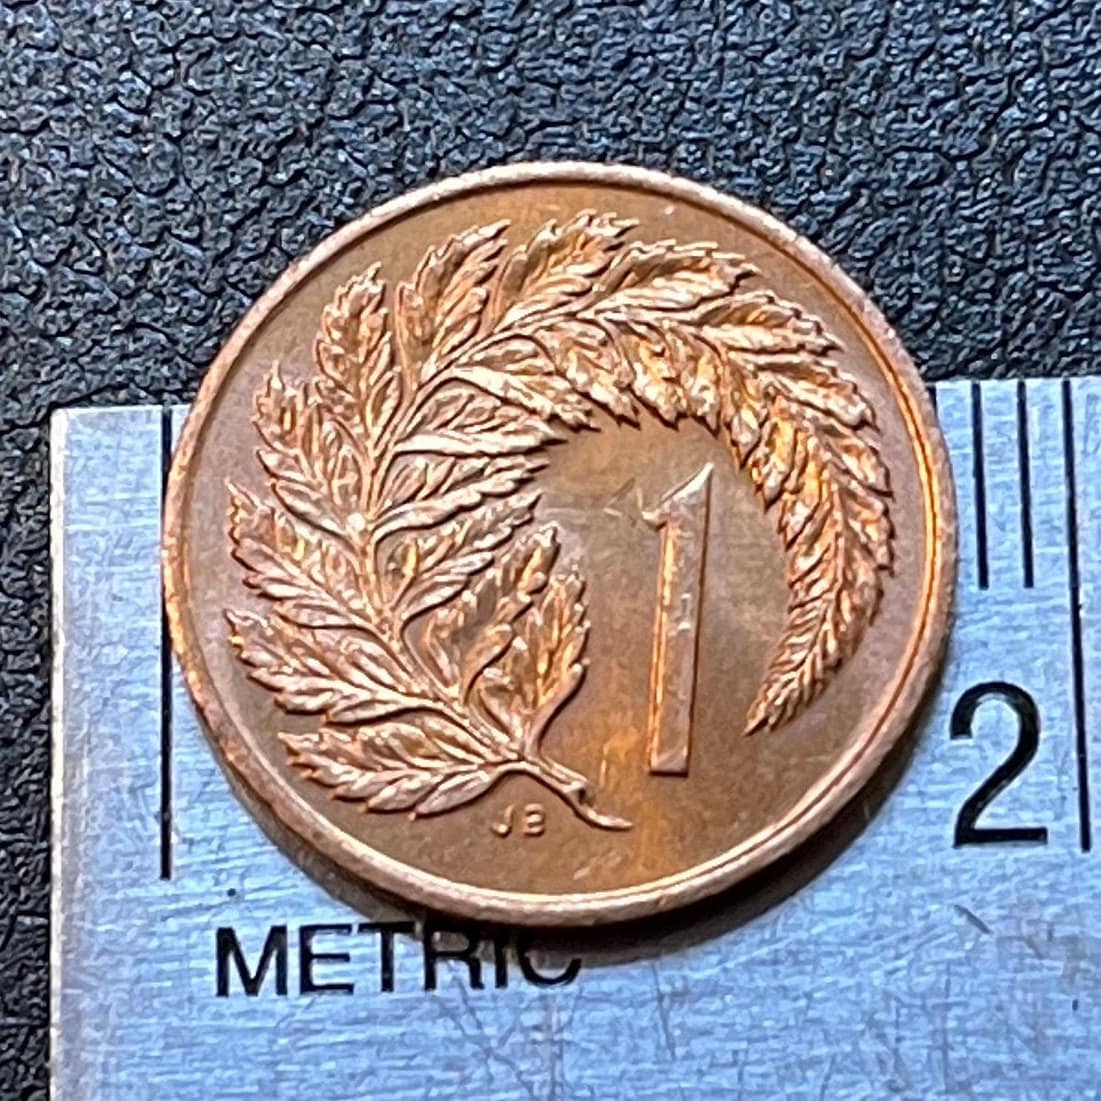 Silver Tree Fern New Zealand 1 Cent Authentic Coin Money for Jewelry and Craft Making